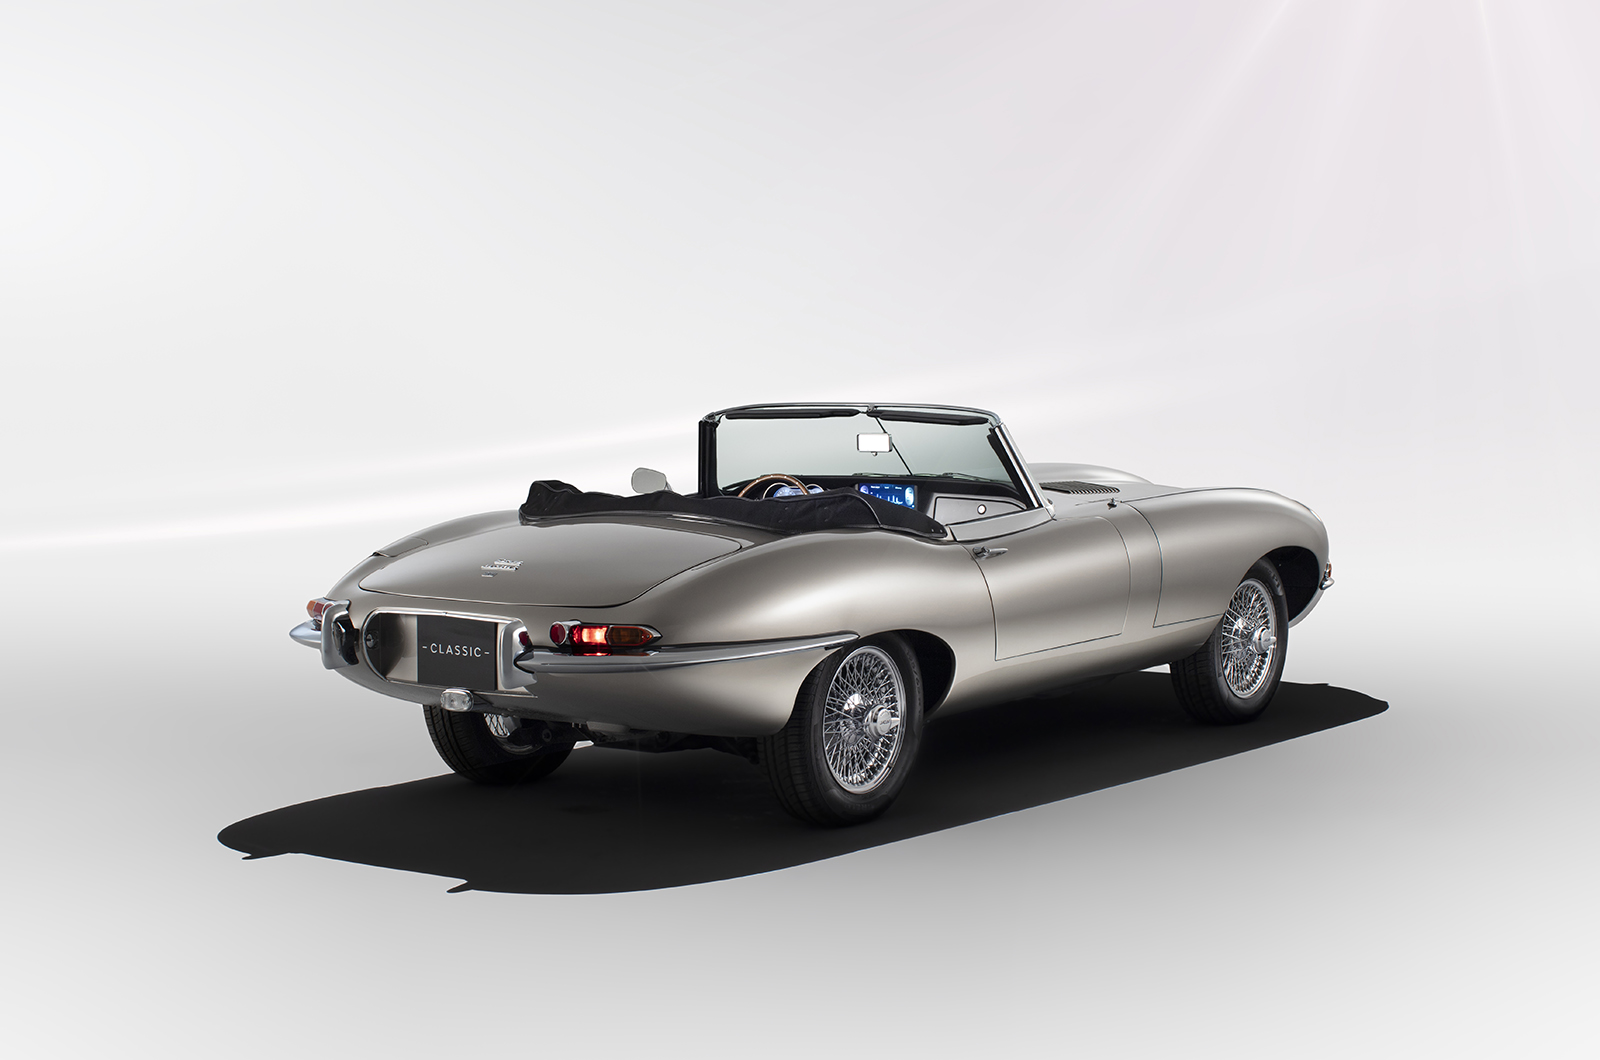 Classic & Sports Car – Electric E-type gets green light